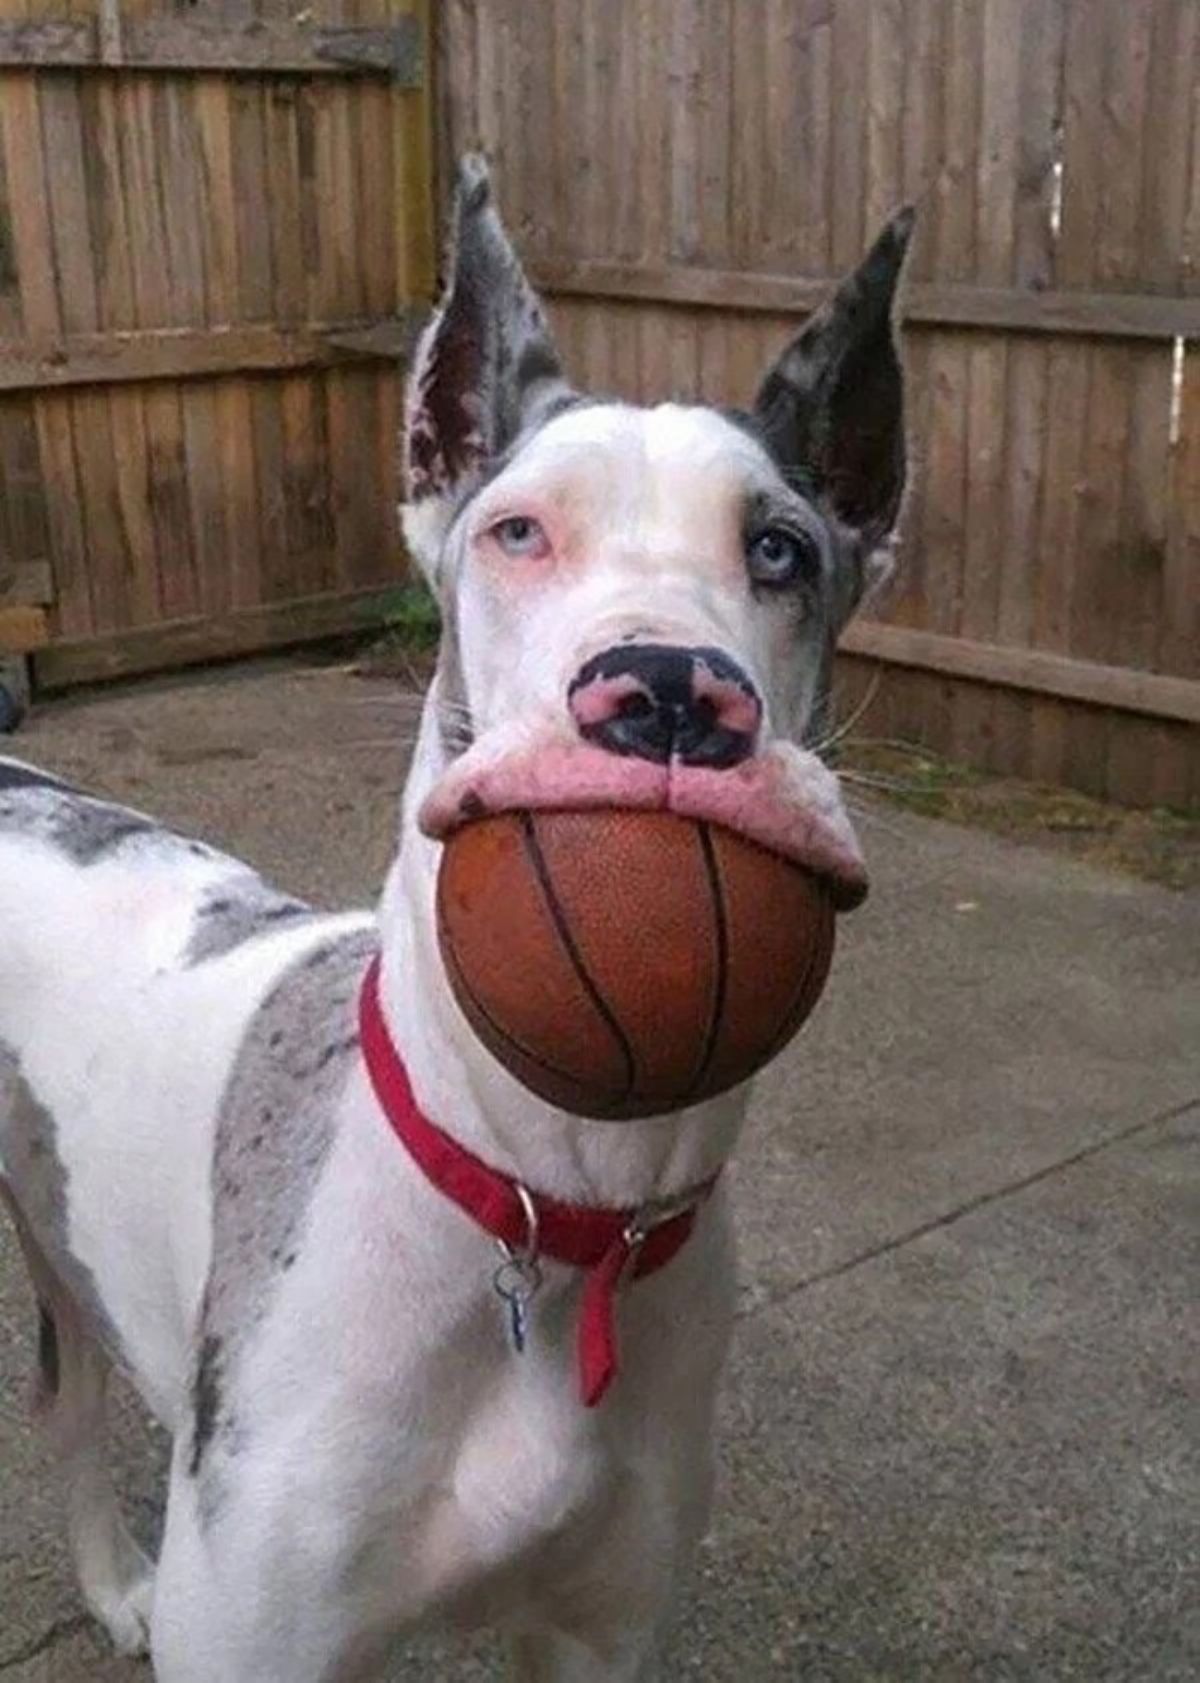 grey and white great dane holding an orange and black basketball in its mouth